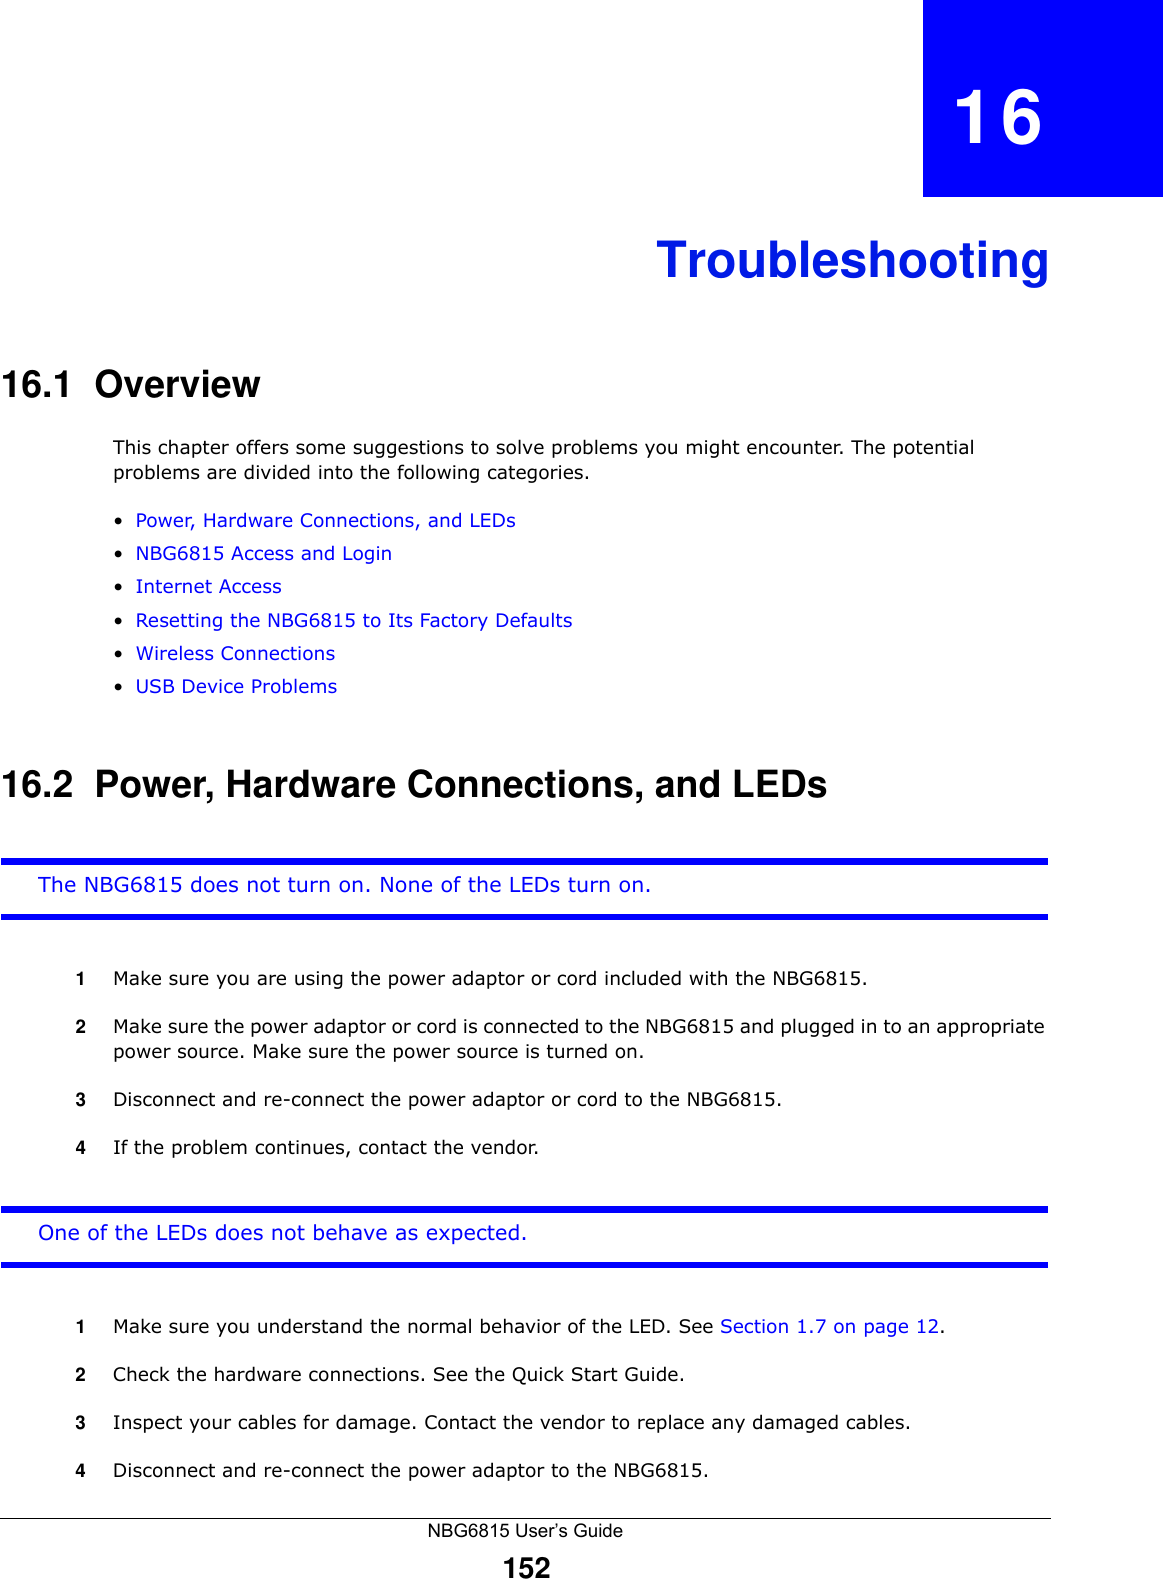 NBG6815 User’s Guide152CHAPTER   16Troubleshooting16.1  OverviewThis chapter offers some suggestions to solve problems you might encounter. The potential problems are divided into the following categories. •Power, Hardware Connections, and LEDs•NBG6815 Access and Login•Internet Access•Resetting the NBG6815 to Its Factory Defaults•Wireless Connections•USB Device Problems16.2  Power, Hardware Connections, and LEDsThe NBG6815 does not turn on. None of the LEDs turn on.1Make sure you are using the power adaptor or cord included with the NBG6815.2Make sure the power adaptor or cord is connected to the NBG6815 and plugged in to an appropriate power source. Make sure the power source is turned on.3Disconnect and re-connect the power adaptor or cord to the NBG6815.4If the problem continues, contact the vendor.One of the LEDs does not behave as expected.1Make sure you understand the normal behavior of the LED. See Section 1.7 on page 12.2Check the hardware connections. See the Quick Start Guide. 3Inspect your cables for damage. Contact the vendor to replace any damaged cables.4Disconnect and re-connect the power adaptor to the NBG6815. 